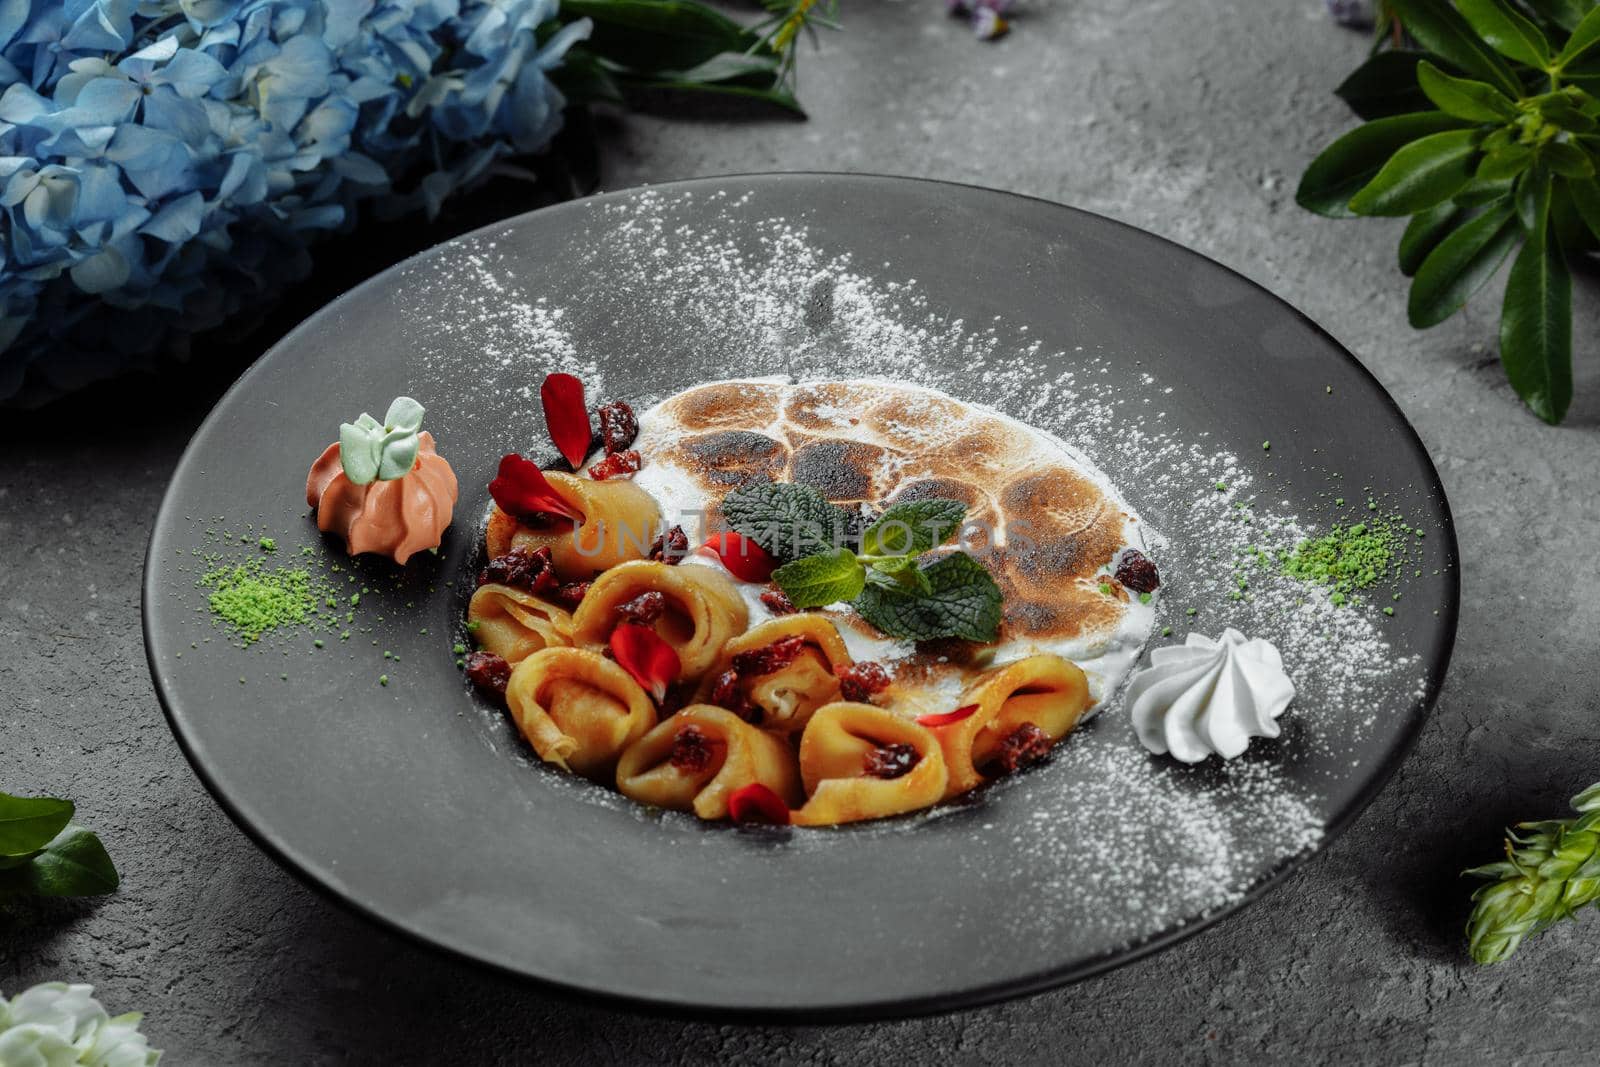 Pancakes with cheese in orange sauce served with caramelized nuts and almonds. Appetizing dish. Culinary photography, a proposal to serve a meal.